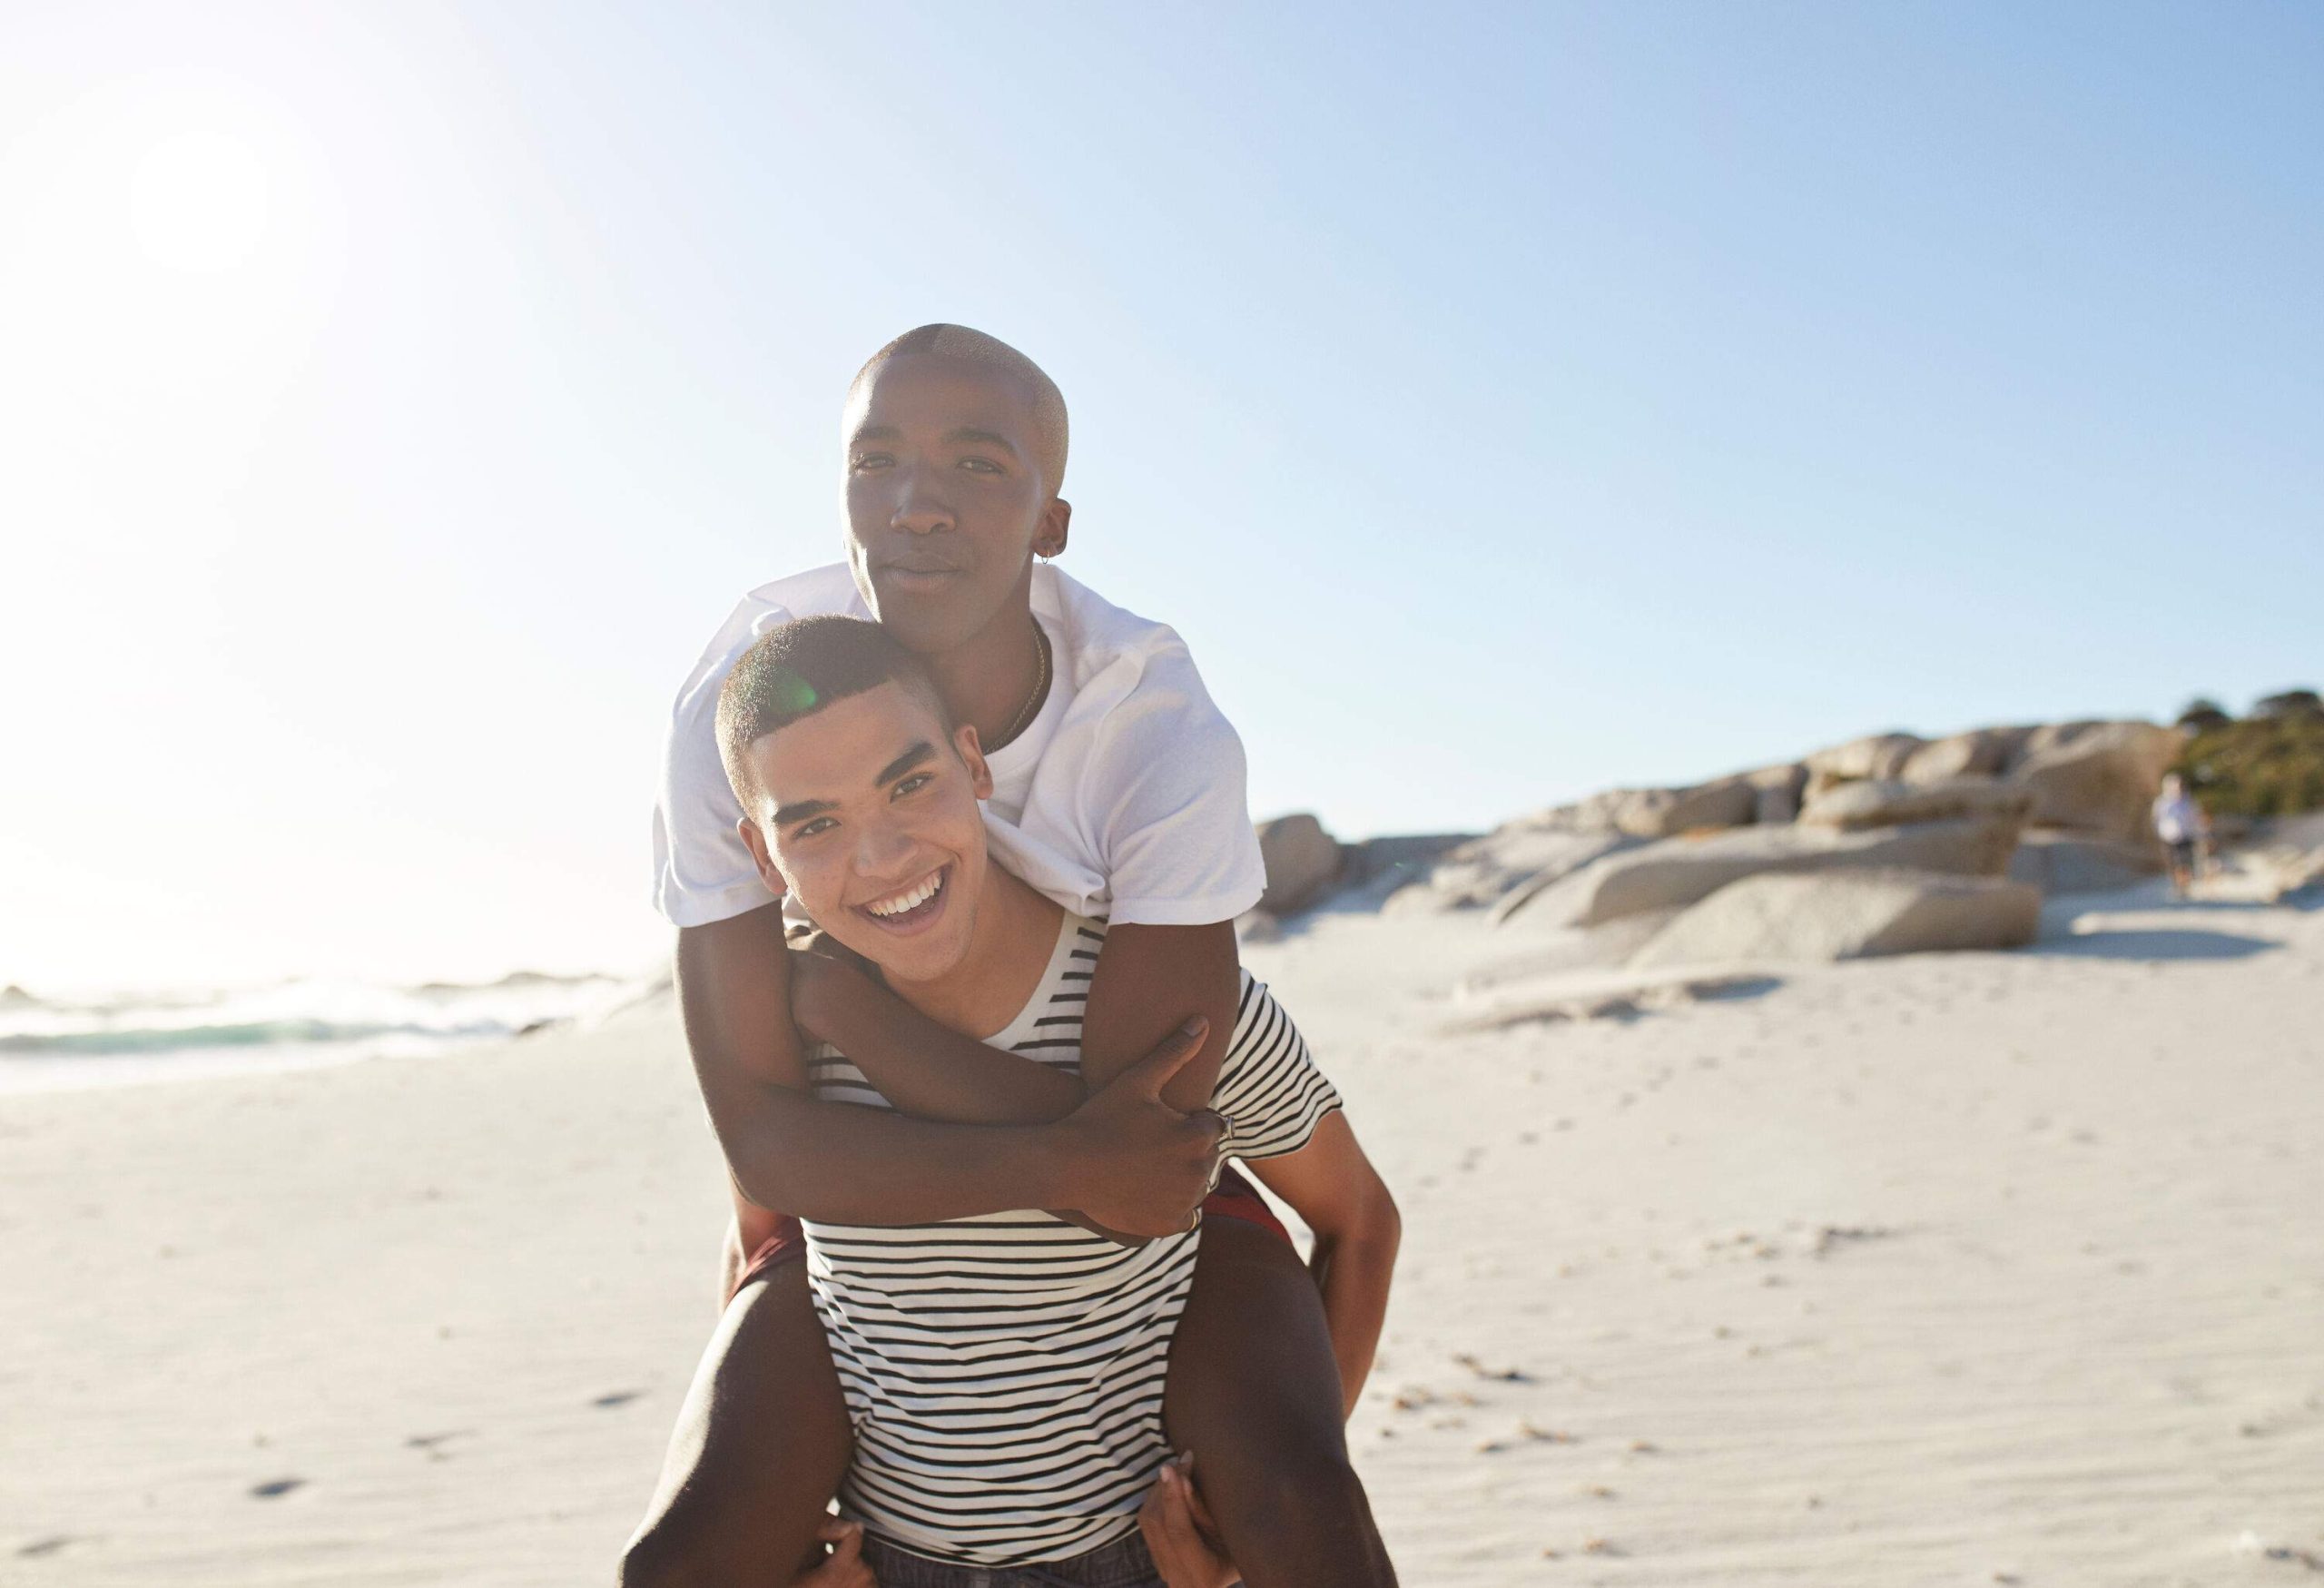 A man smiles as he gives a friend a piggyback ride on the beach.